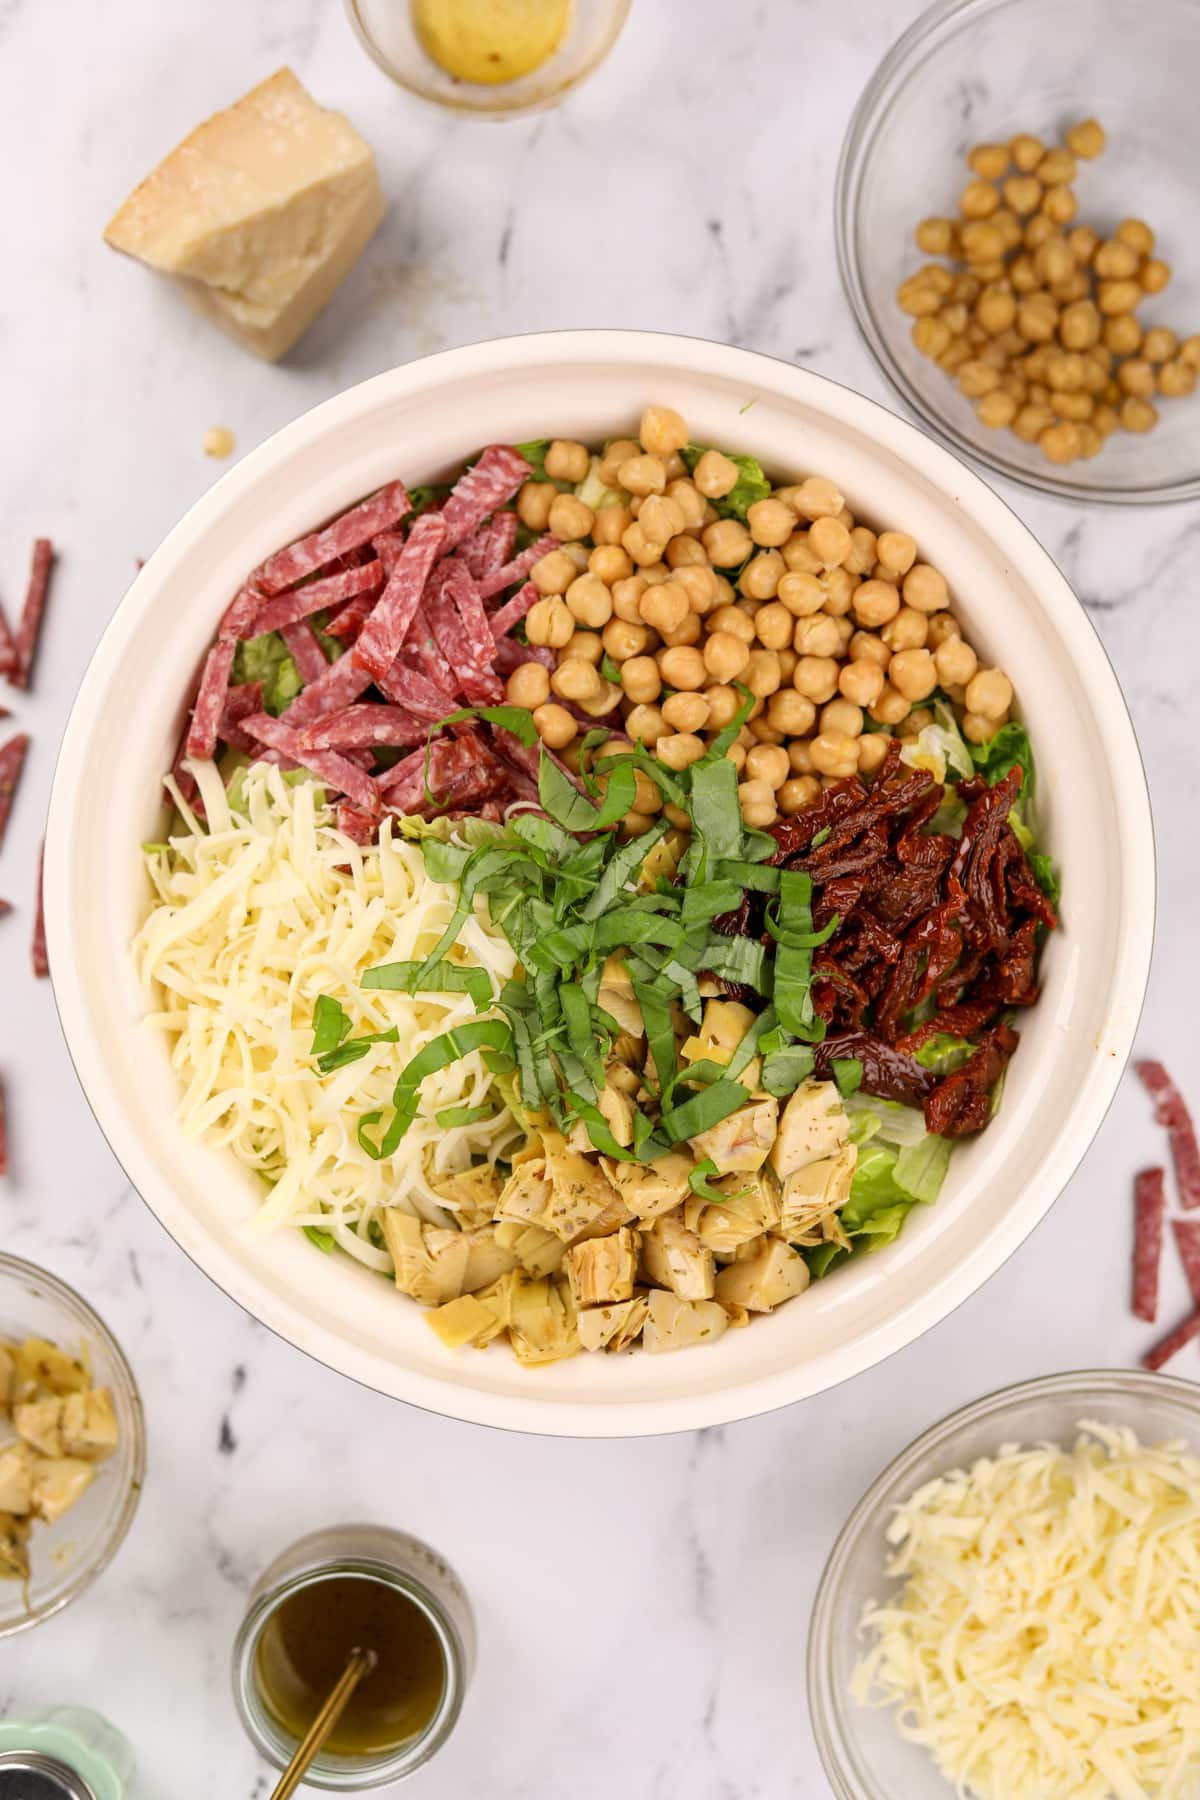 A large salad bowl filled with salad, including sections of toppings: mozzarella, artichokes, basil, sun dried tomatoes, chickpeas, and salami.